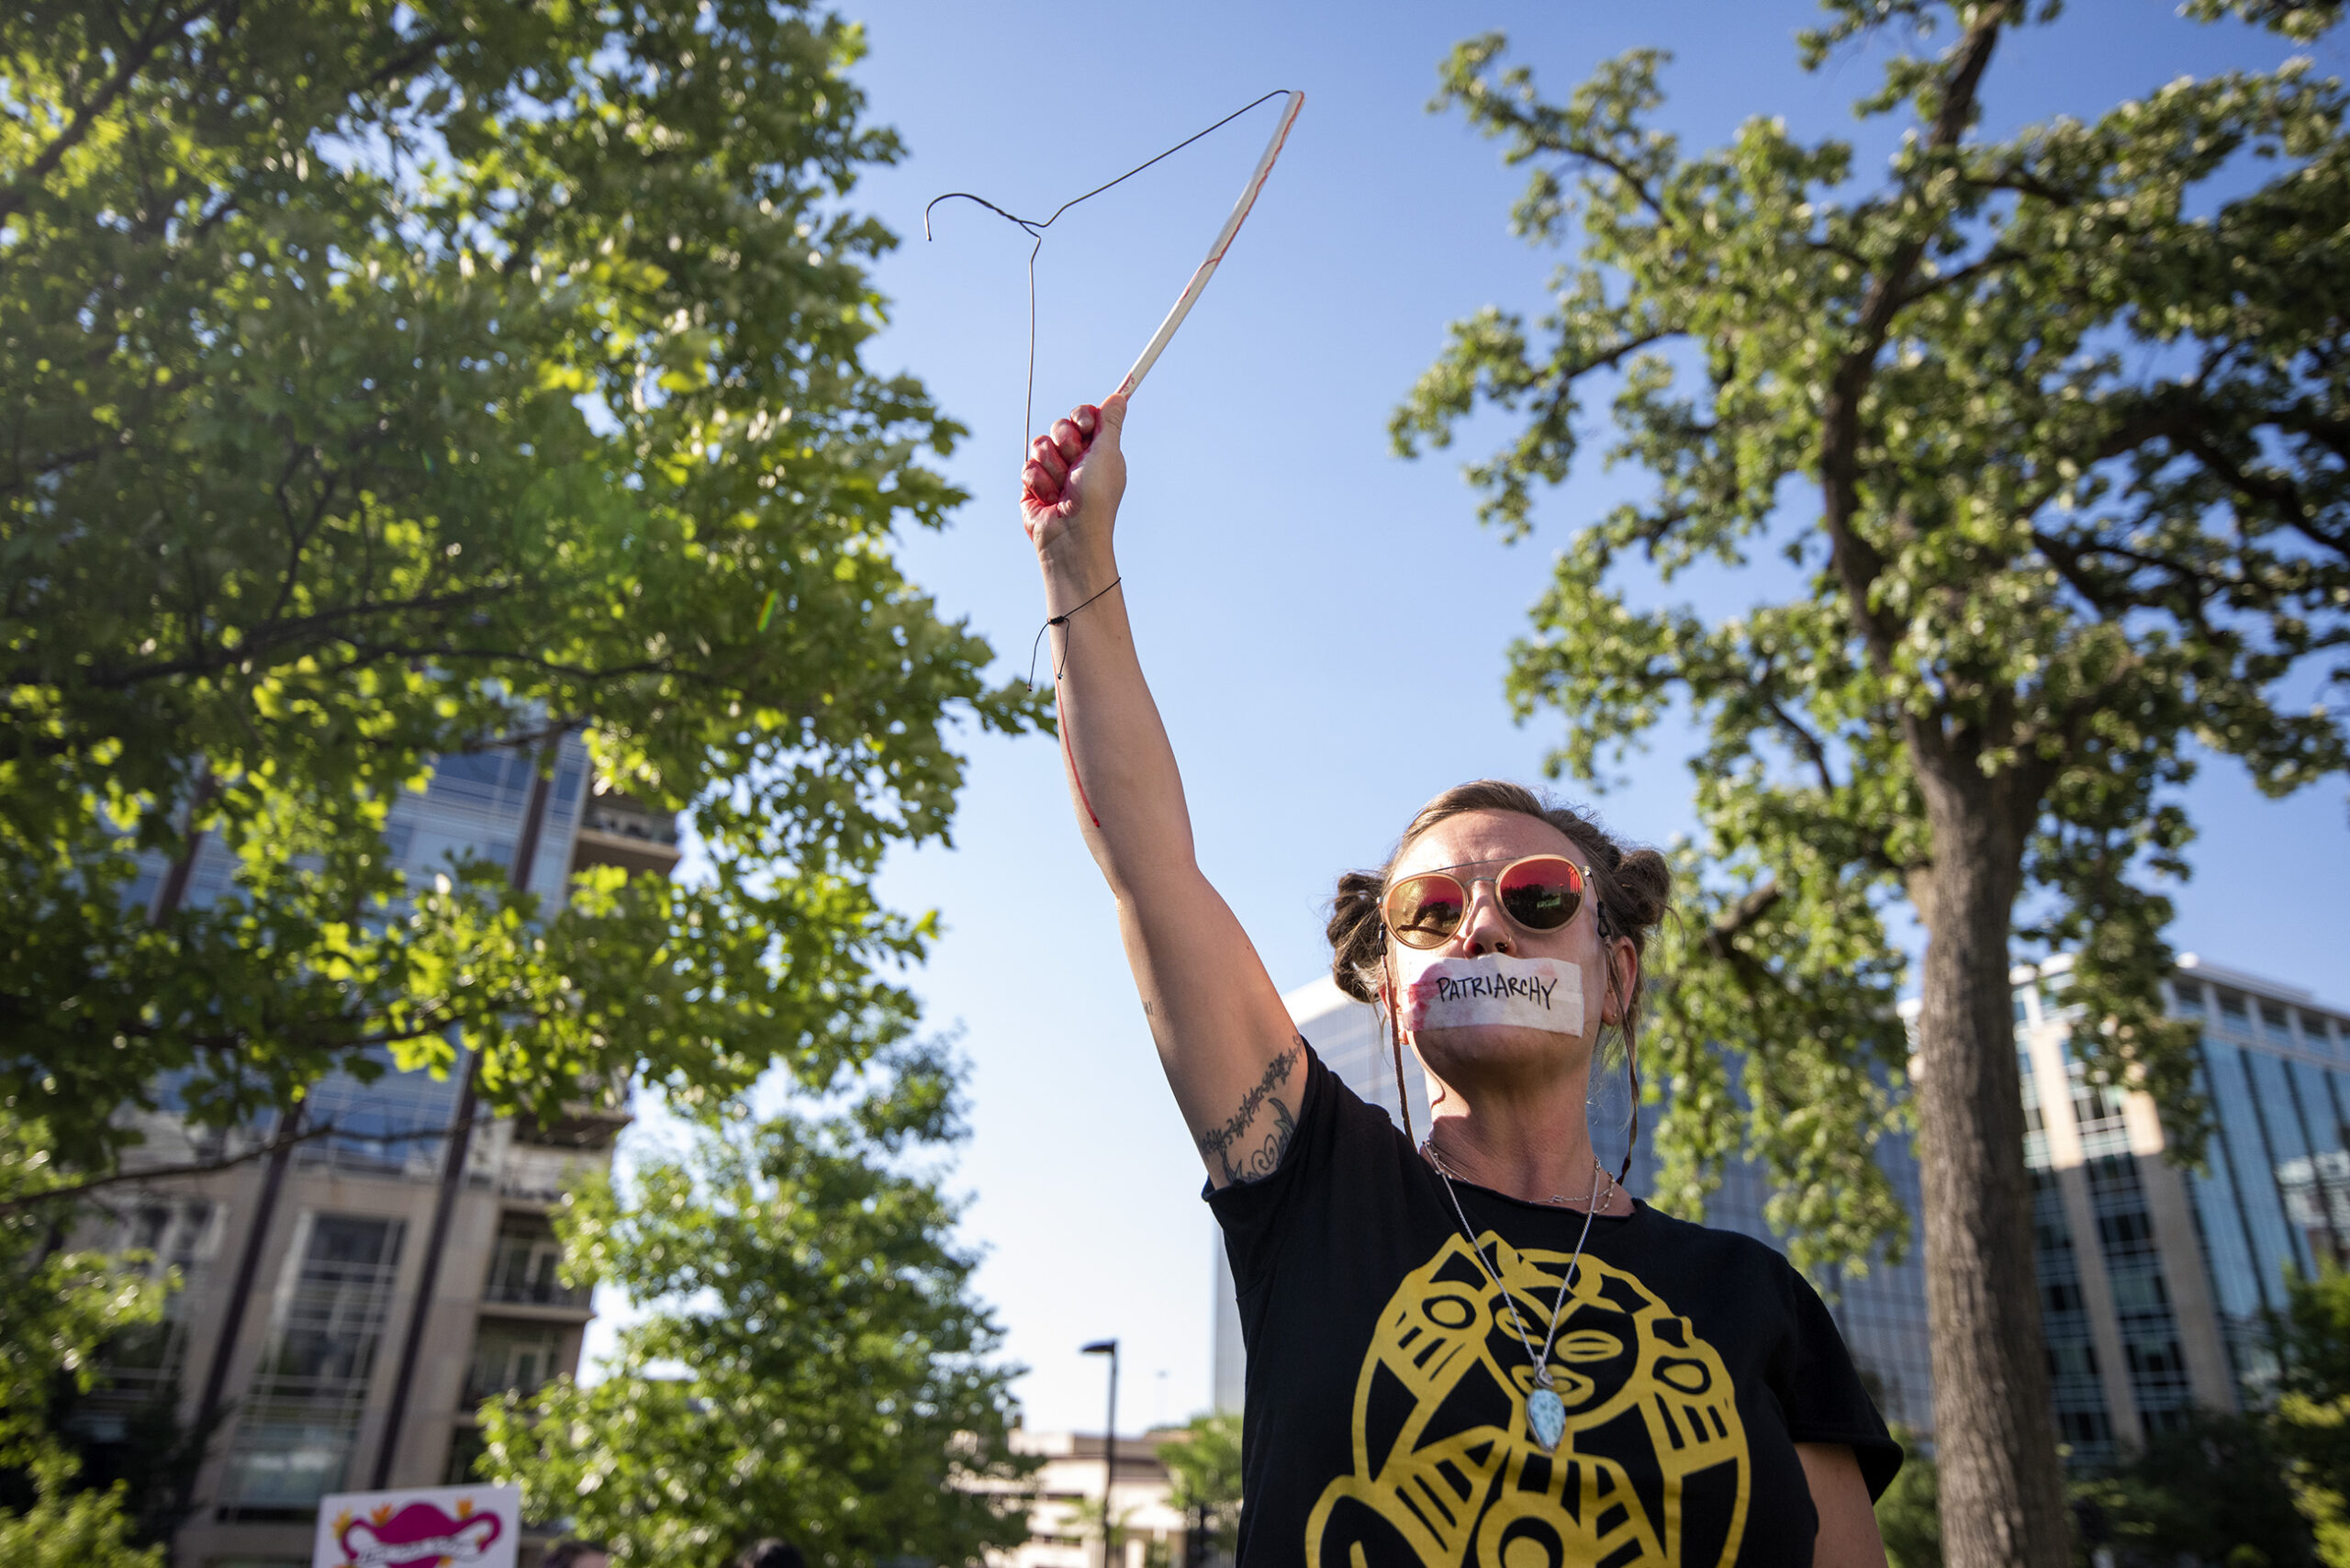 A protester has a piece of tape over her mouth that says "patriarchy." She holds a hanger in the air.